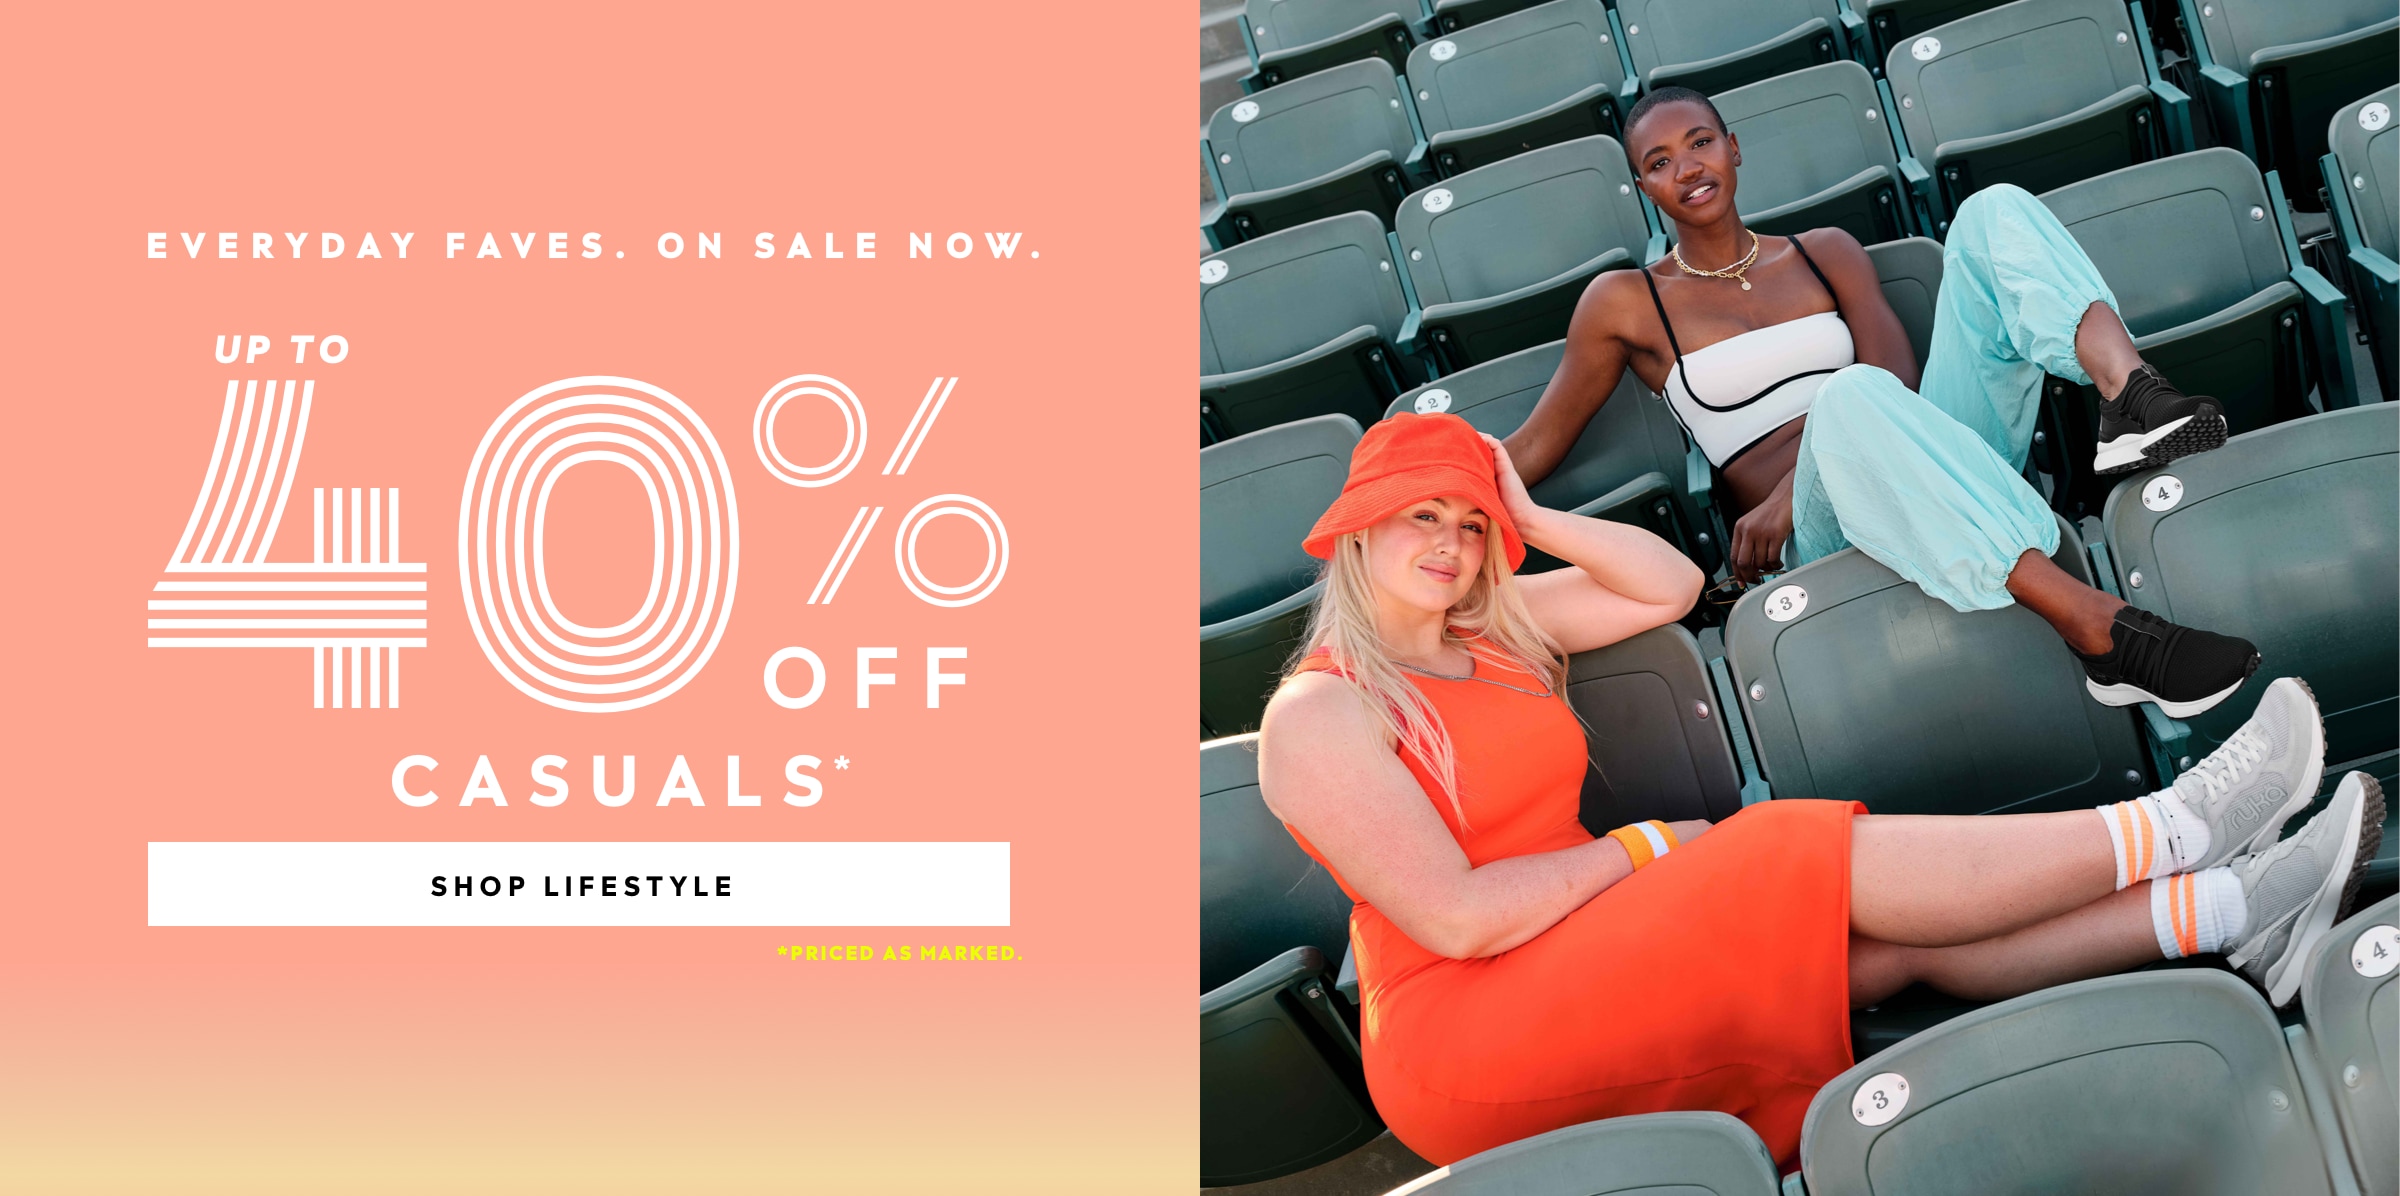 Up to 40 percent off casuals. Priced as marked. Shop Lifestyle.